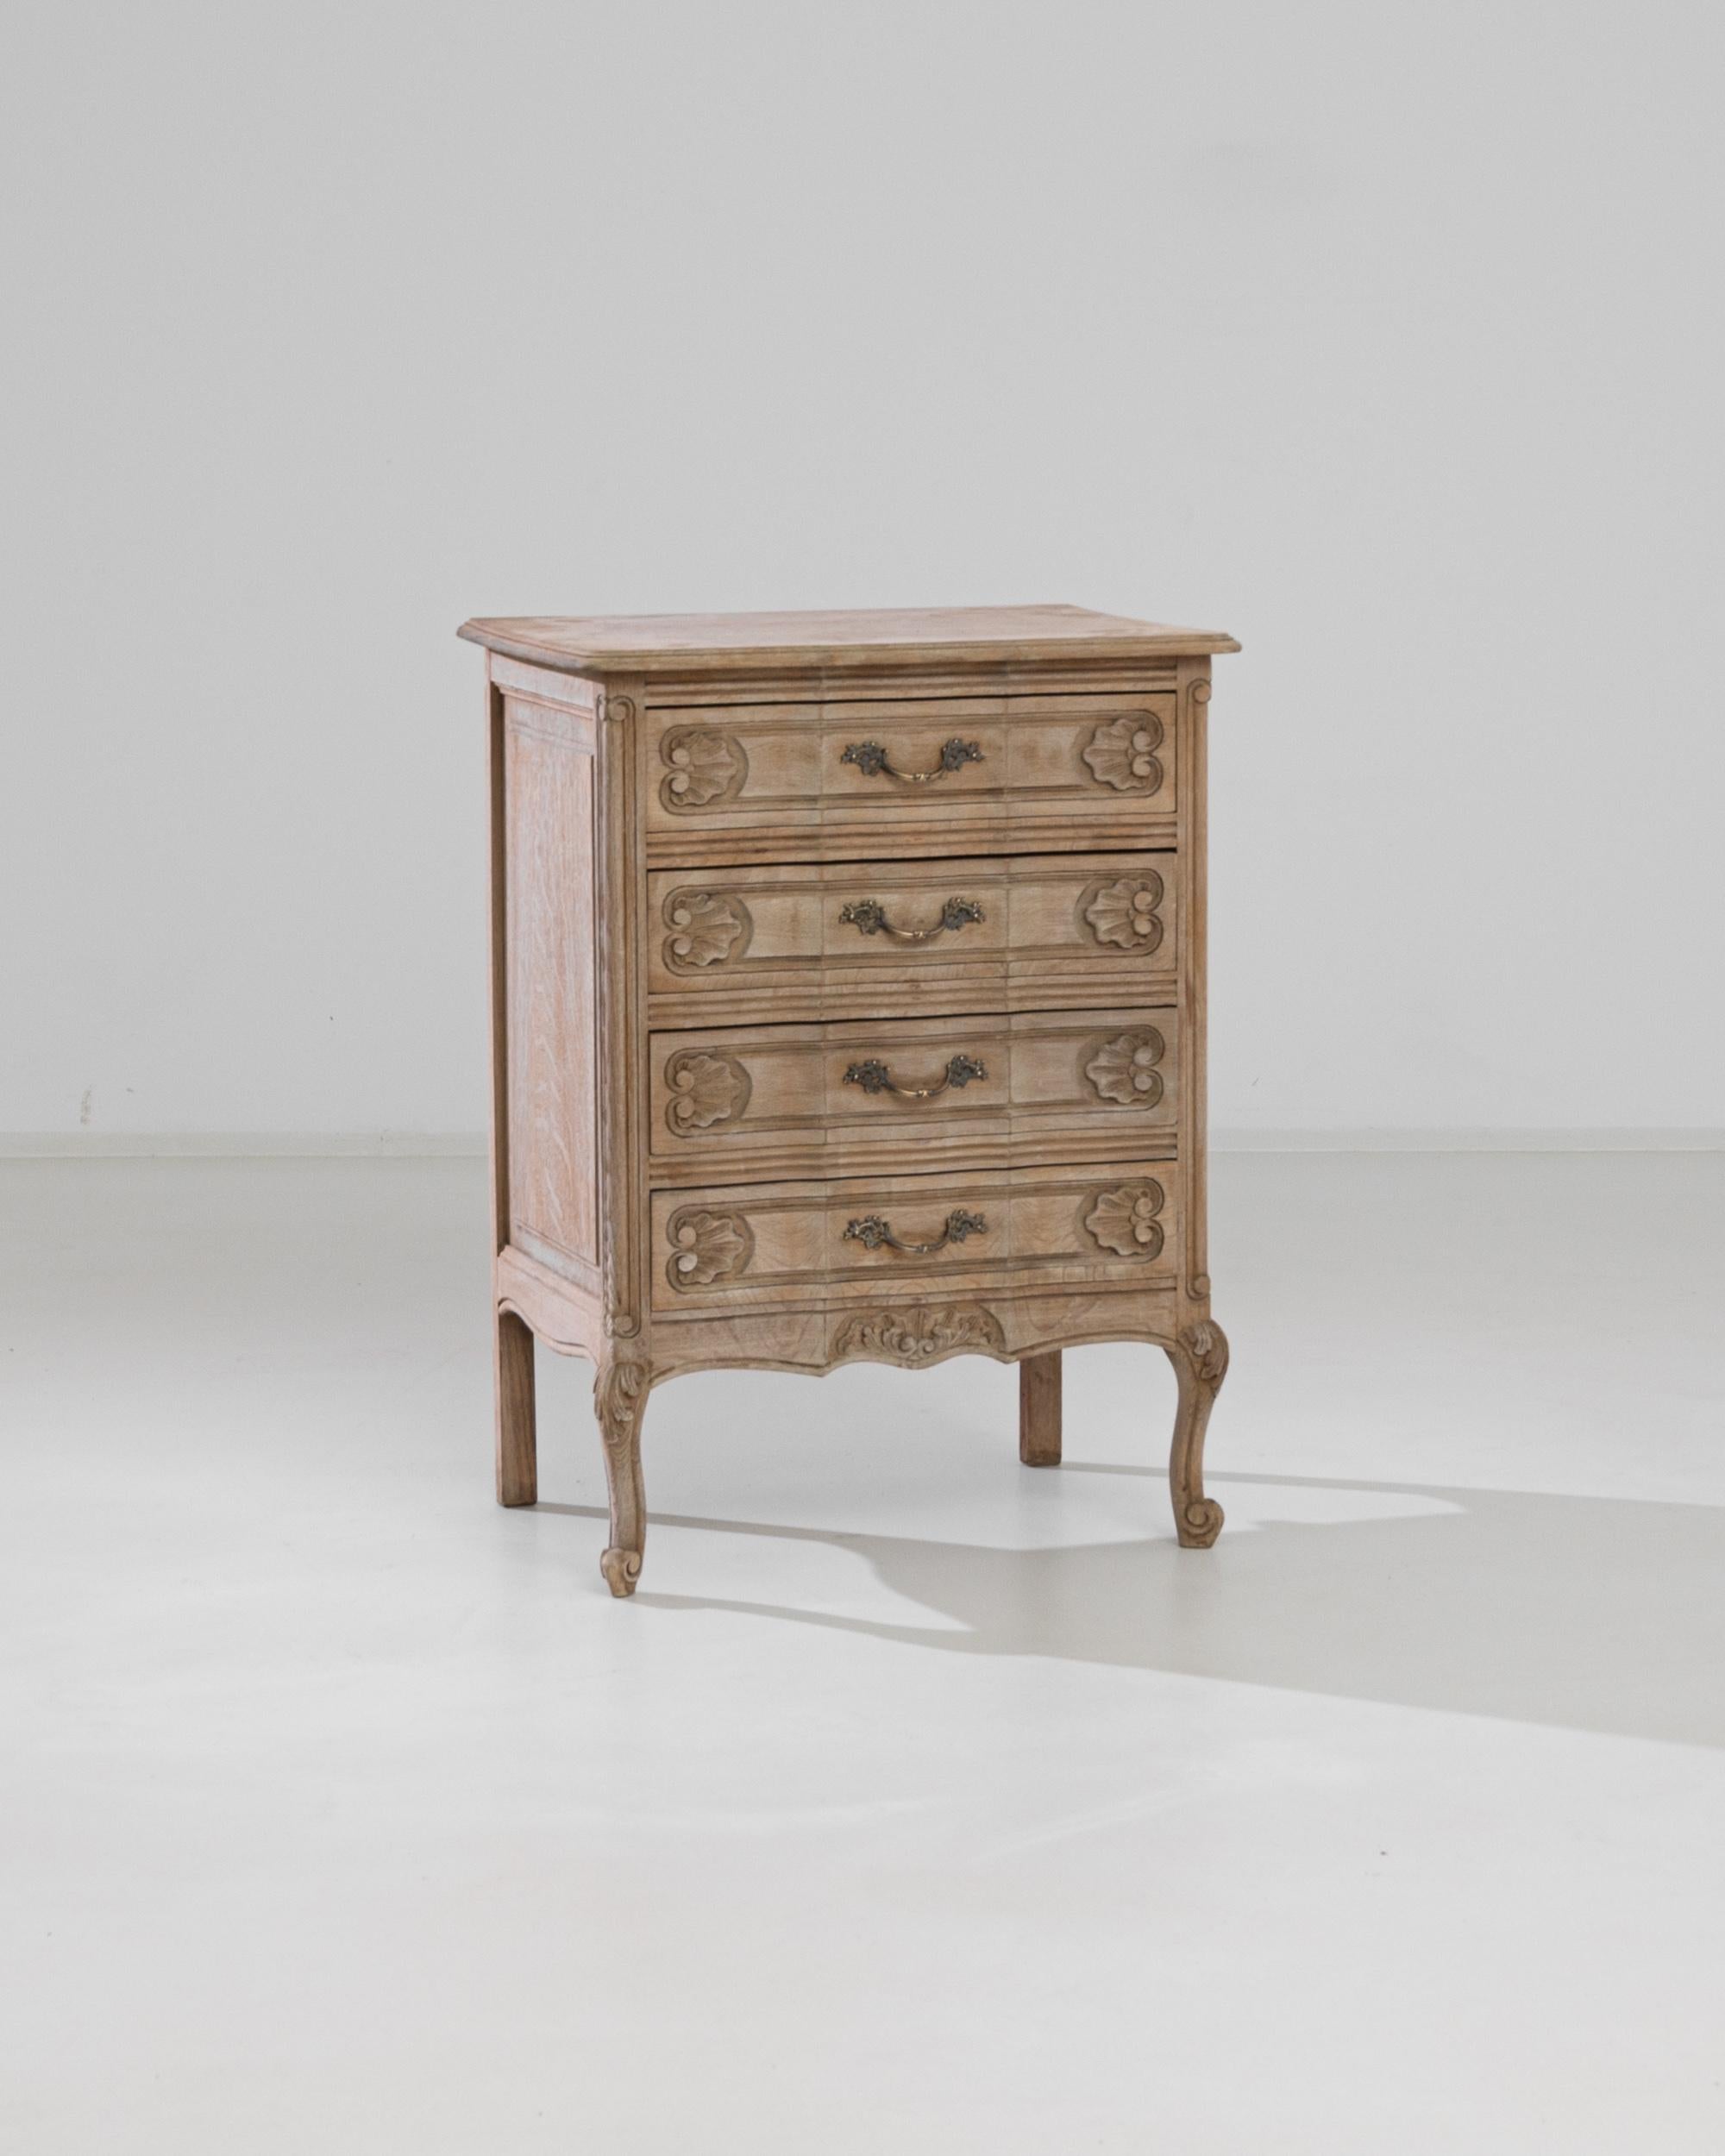 A vintage four-drawer chest from Belgium. Raised on slender cabriole legs, this 20th century dresser boasts classical ornamental seashell and plant motifs, carved on the drawers, apron and front feet. The foliate theme is continued on the gilded